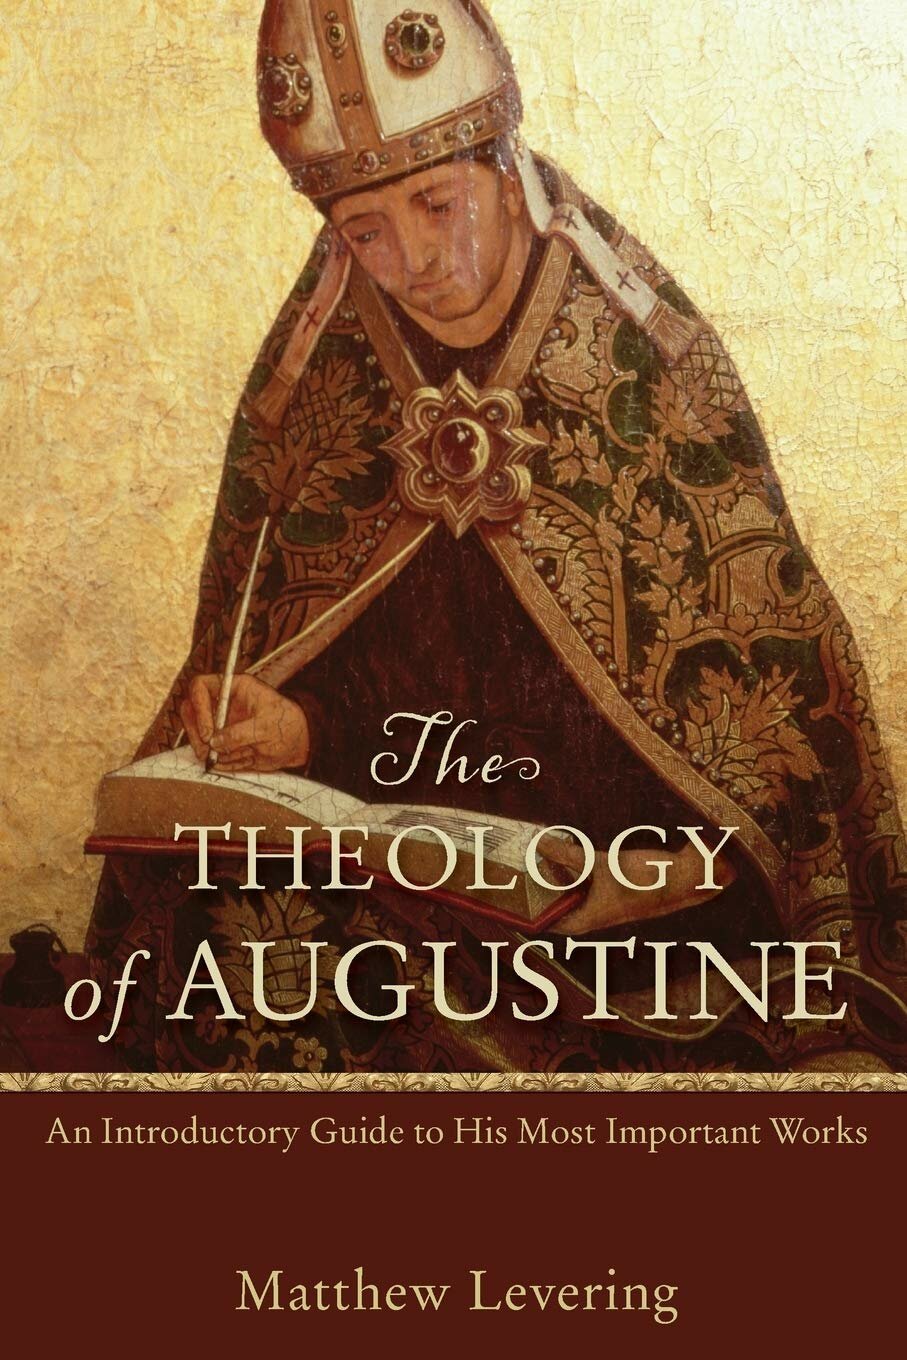 The Theology of Augustine: An Introductory Guide to His Most Important Works